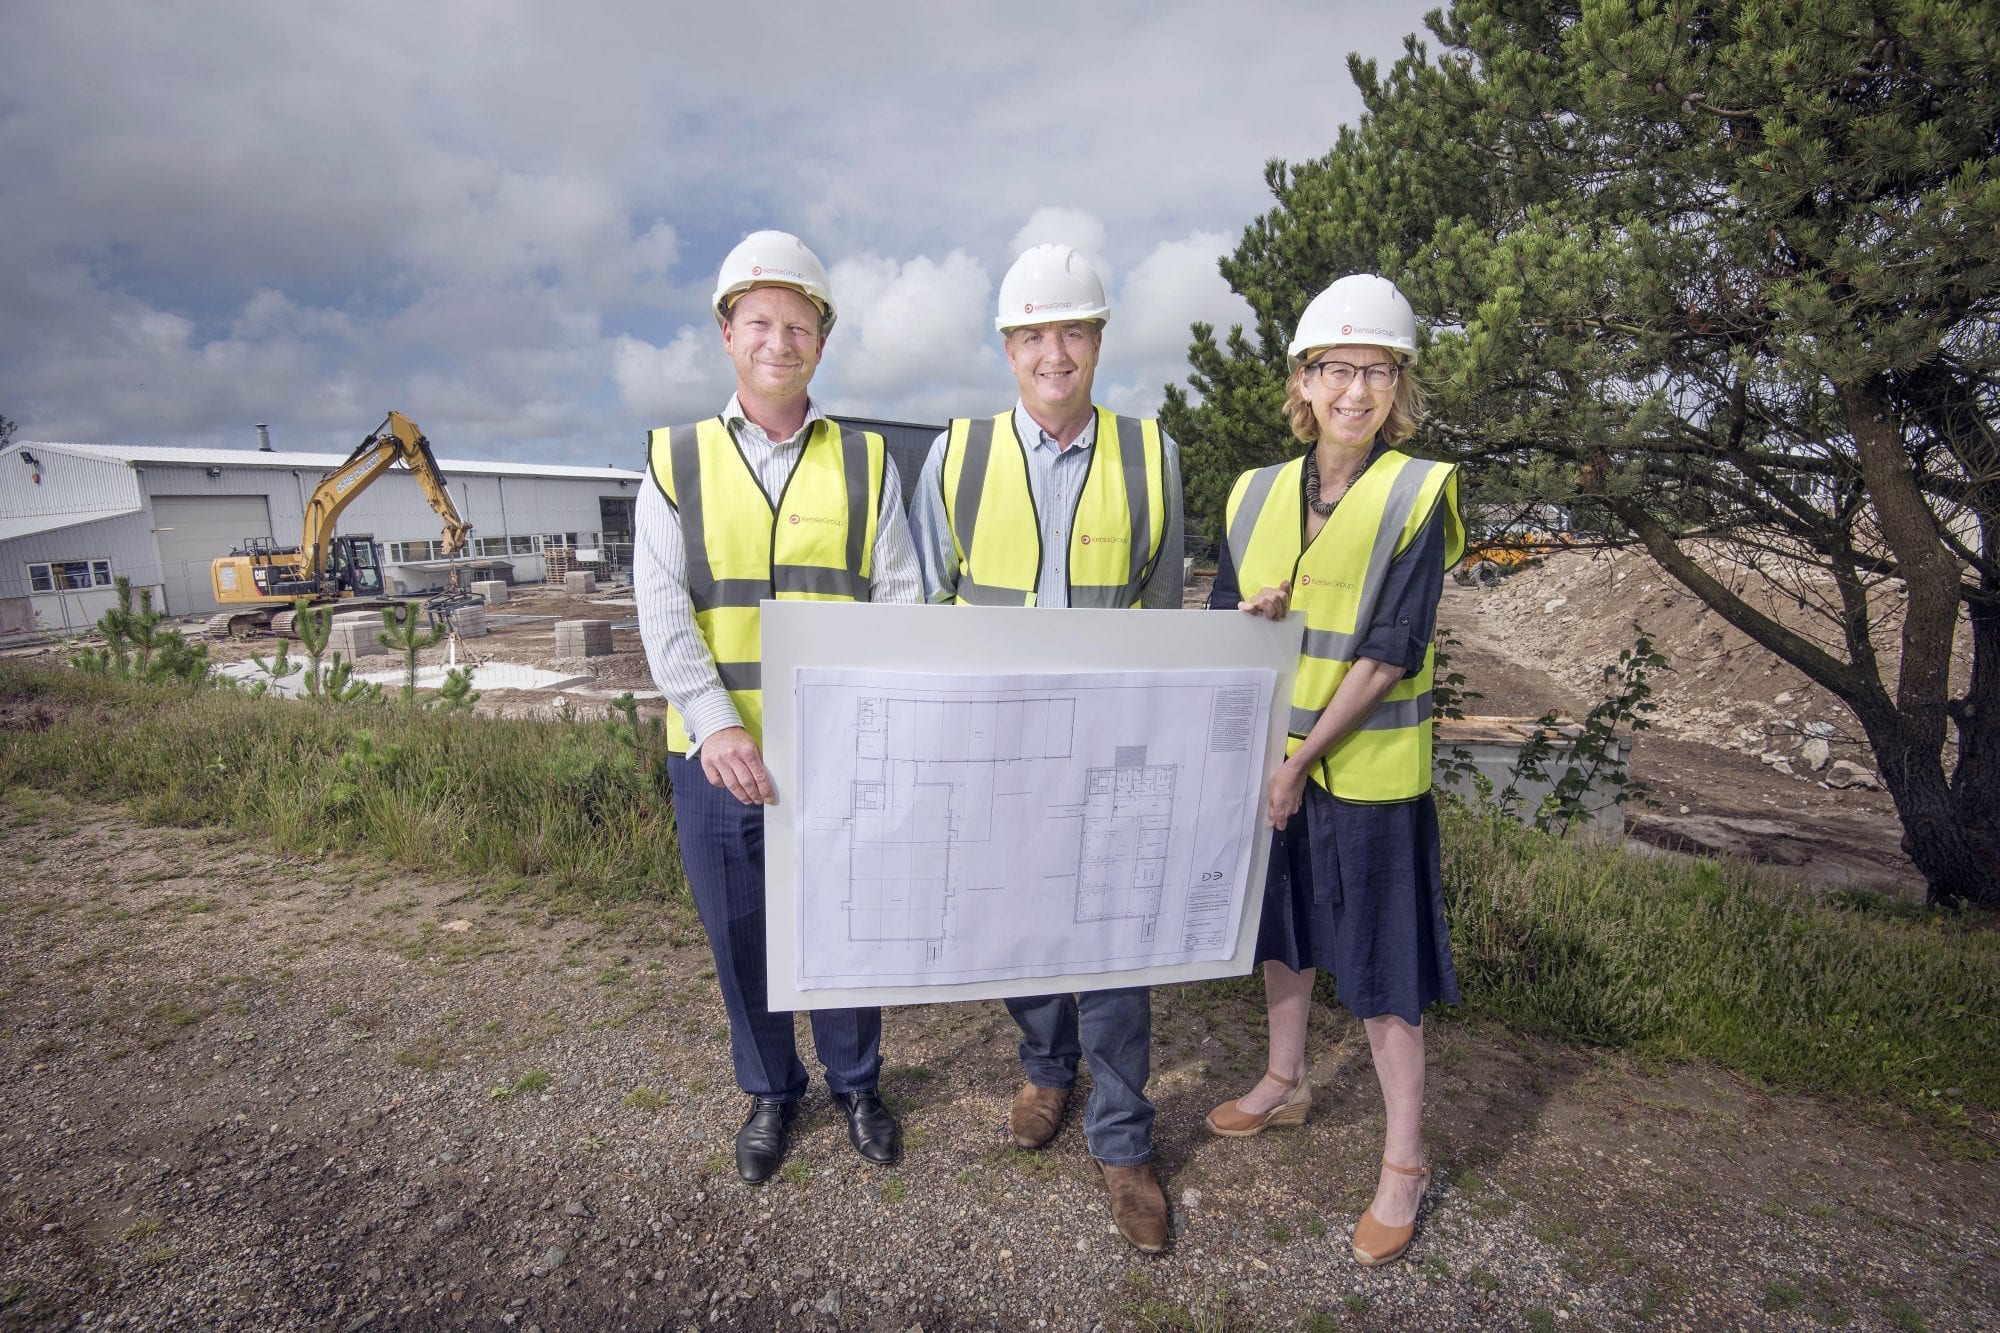 MP Sarah Newton, Simon Lomax (Kensa’s CEO) and Craig Pascoe (HSBC) pose with architect’s plans at the site of Kensa’s new factory build. Photograph by Emily Whitfield-Wicks